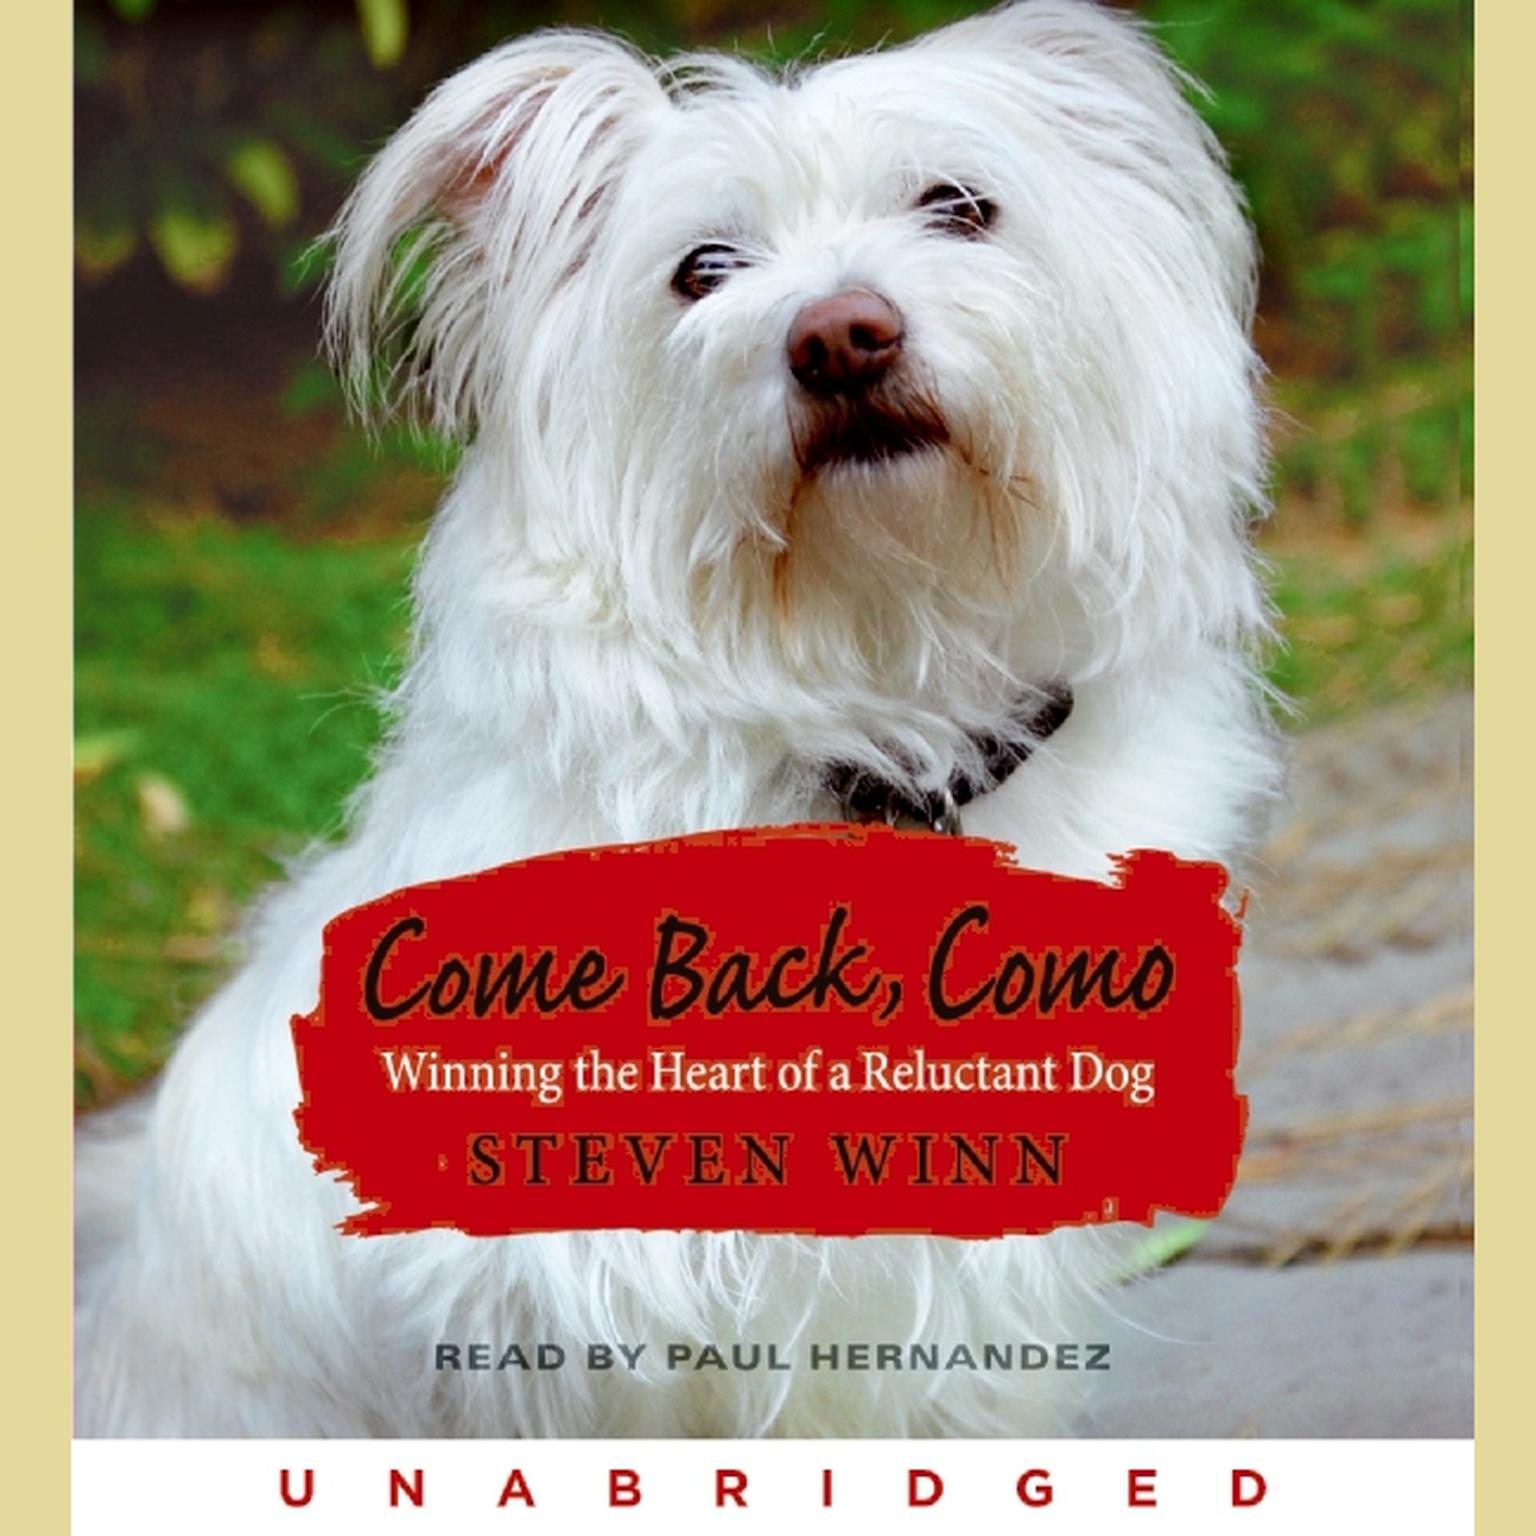 Come Back, Como: Winning the Heart of a Reluctant Dog Audiobook, by Steven Winn